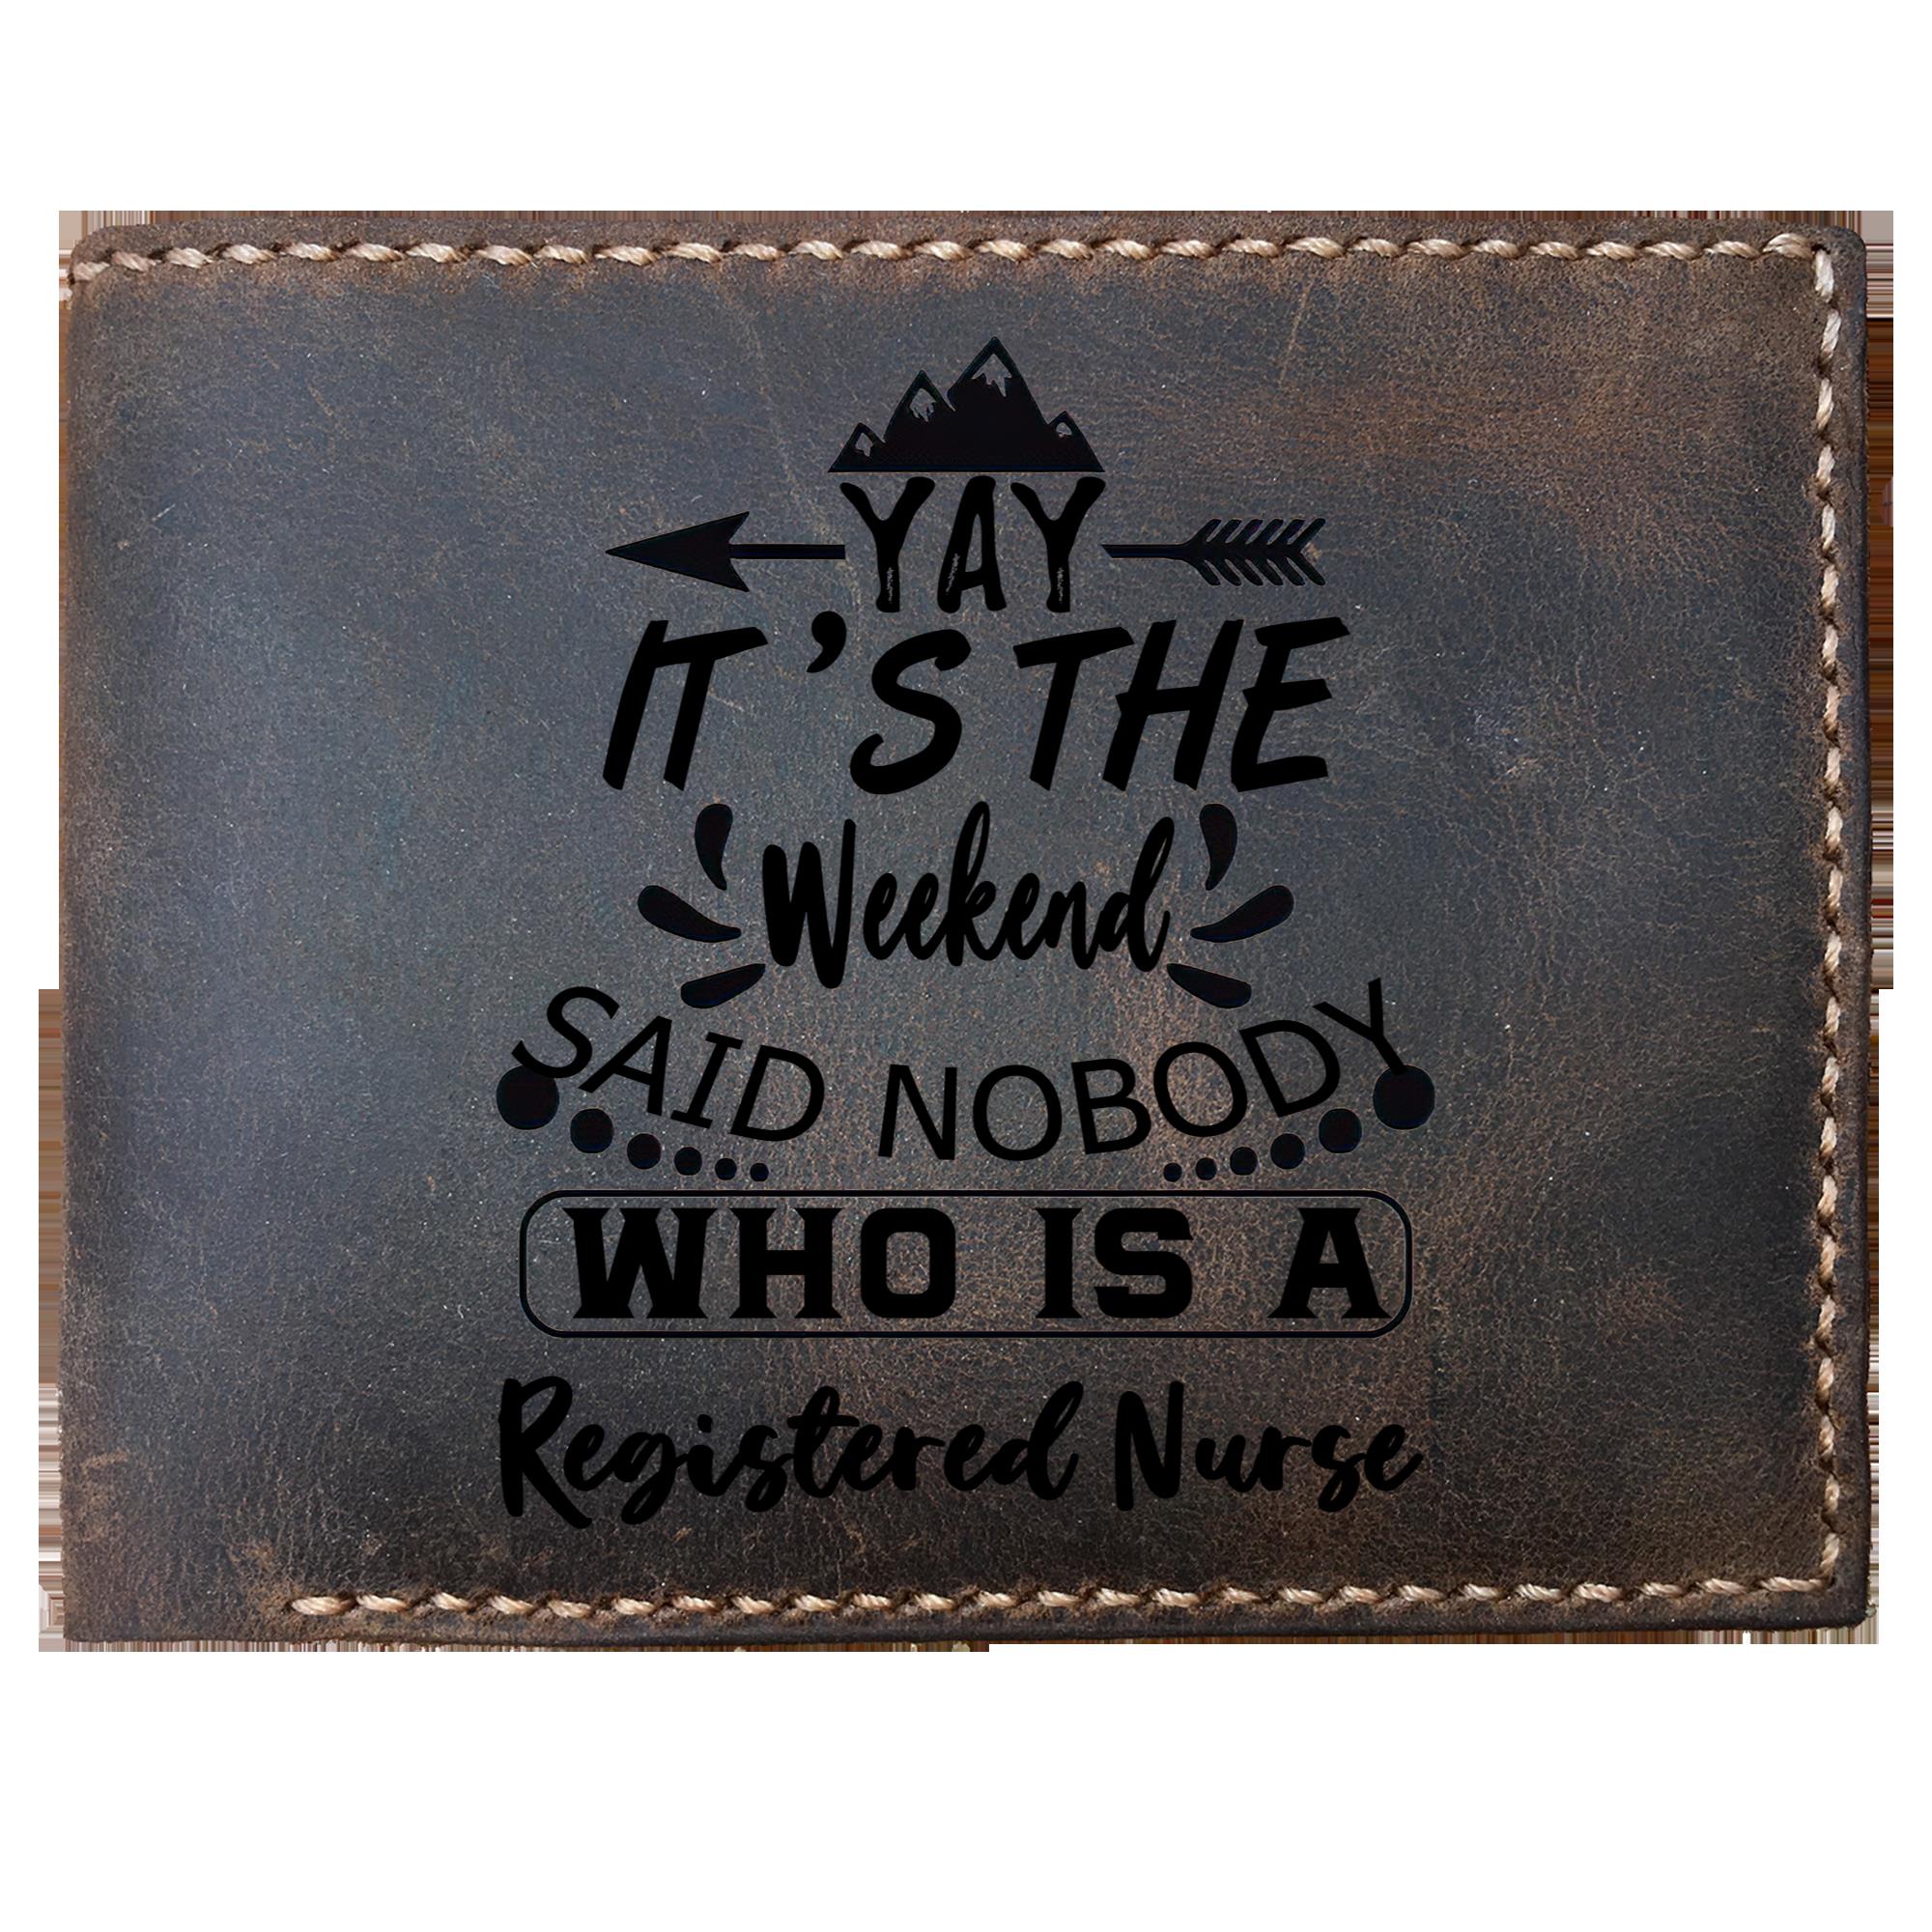 Skitongifts Funny Custom Laser Engraved Bifold Leather Wallet For Men, It's The Weekend Said Nobody Who Is A Registered Nurse, Father's Day Gifts